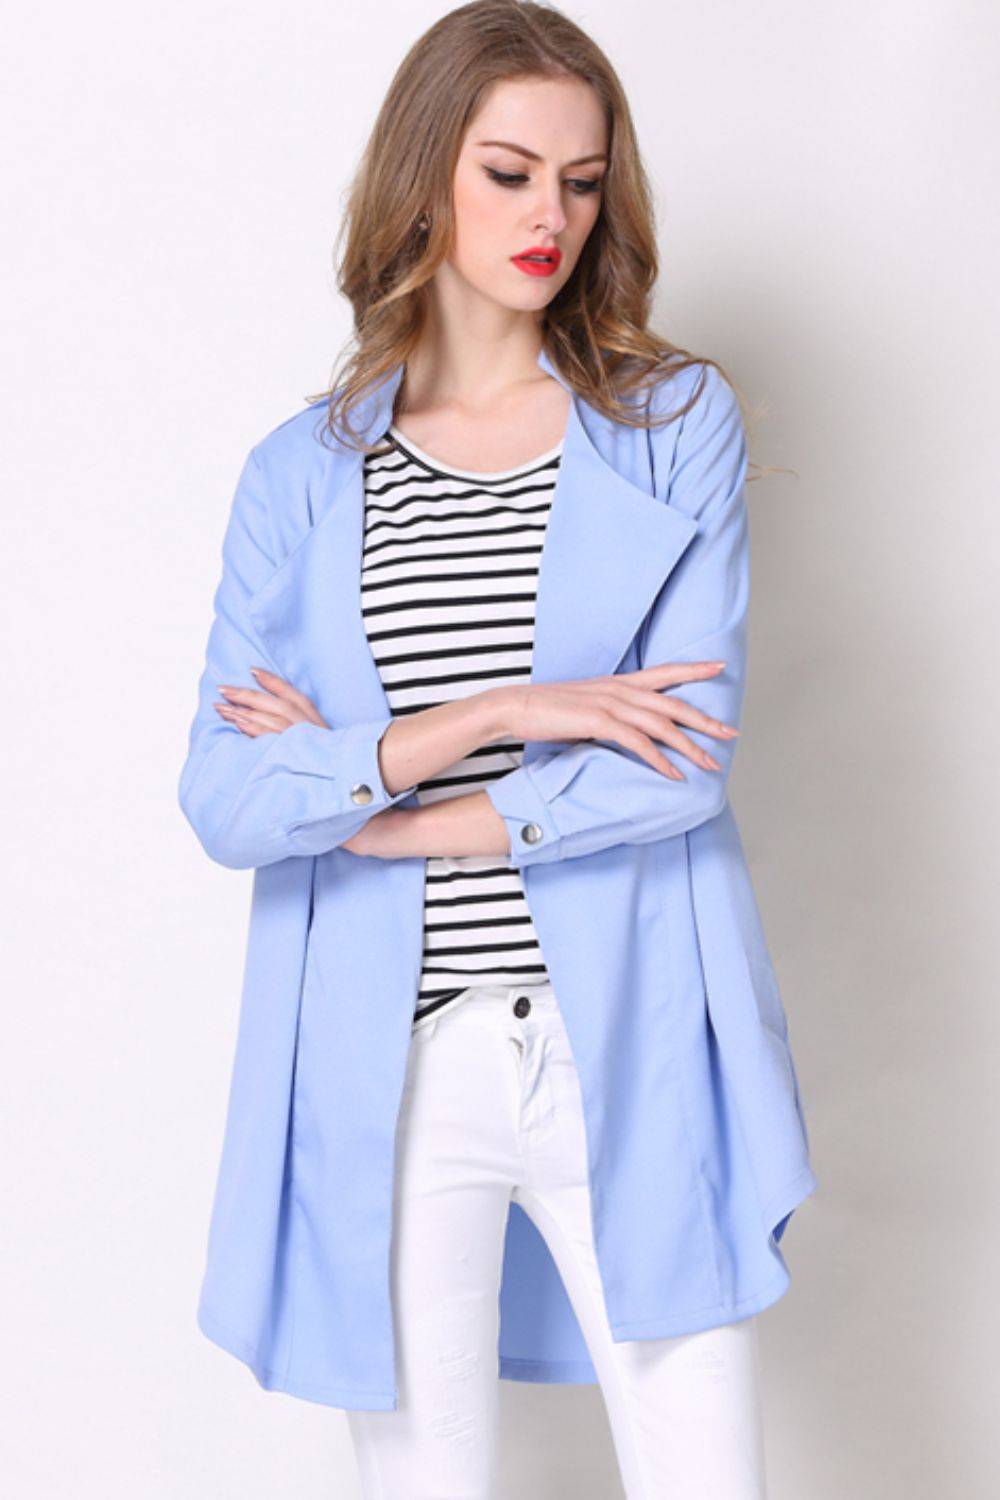 Full Size Open Front Longline Trench Coat - AllIn Computer